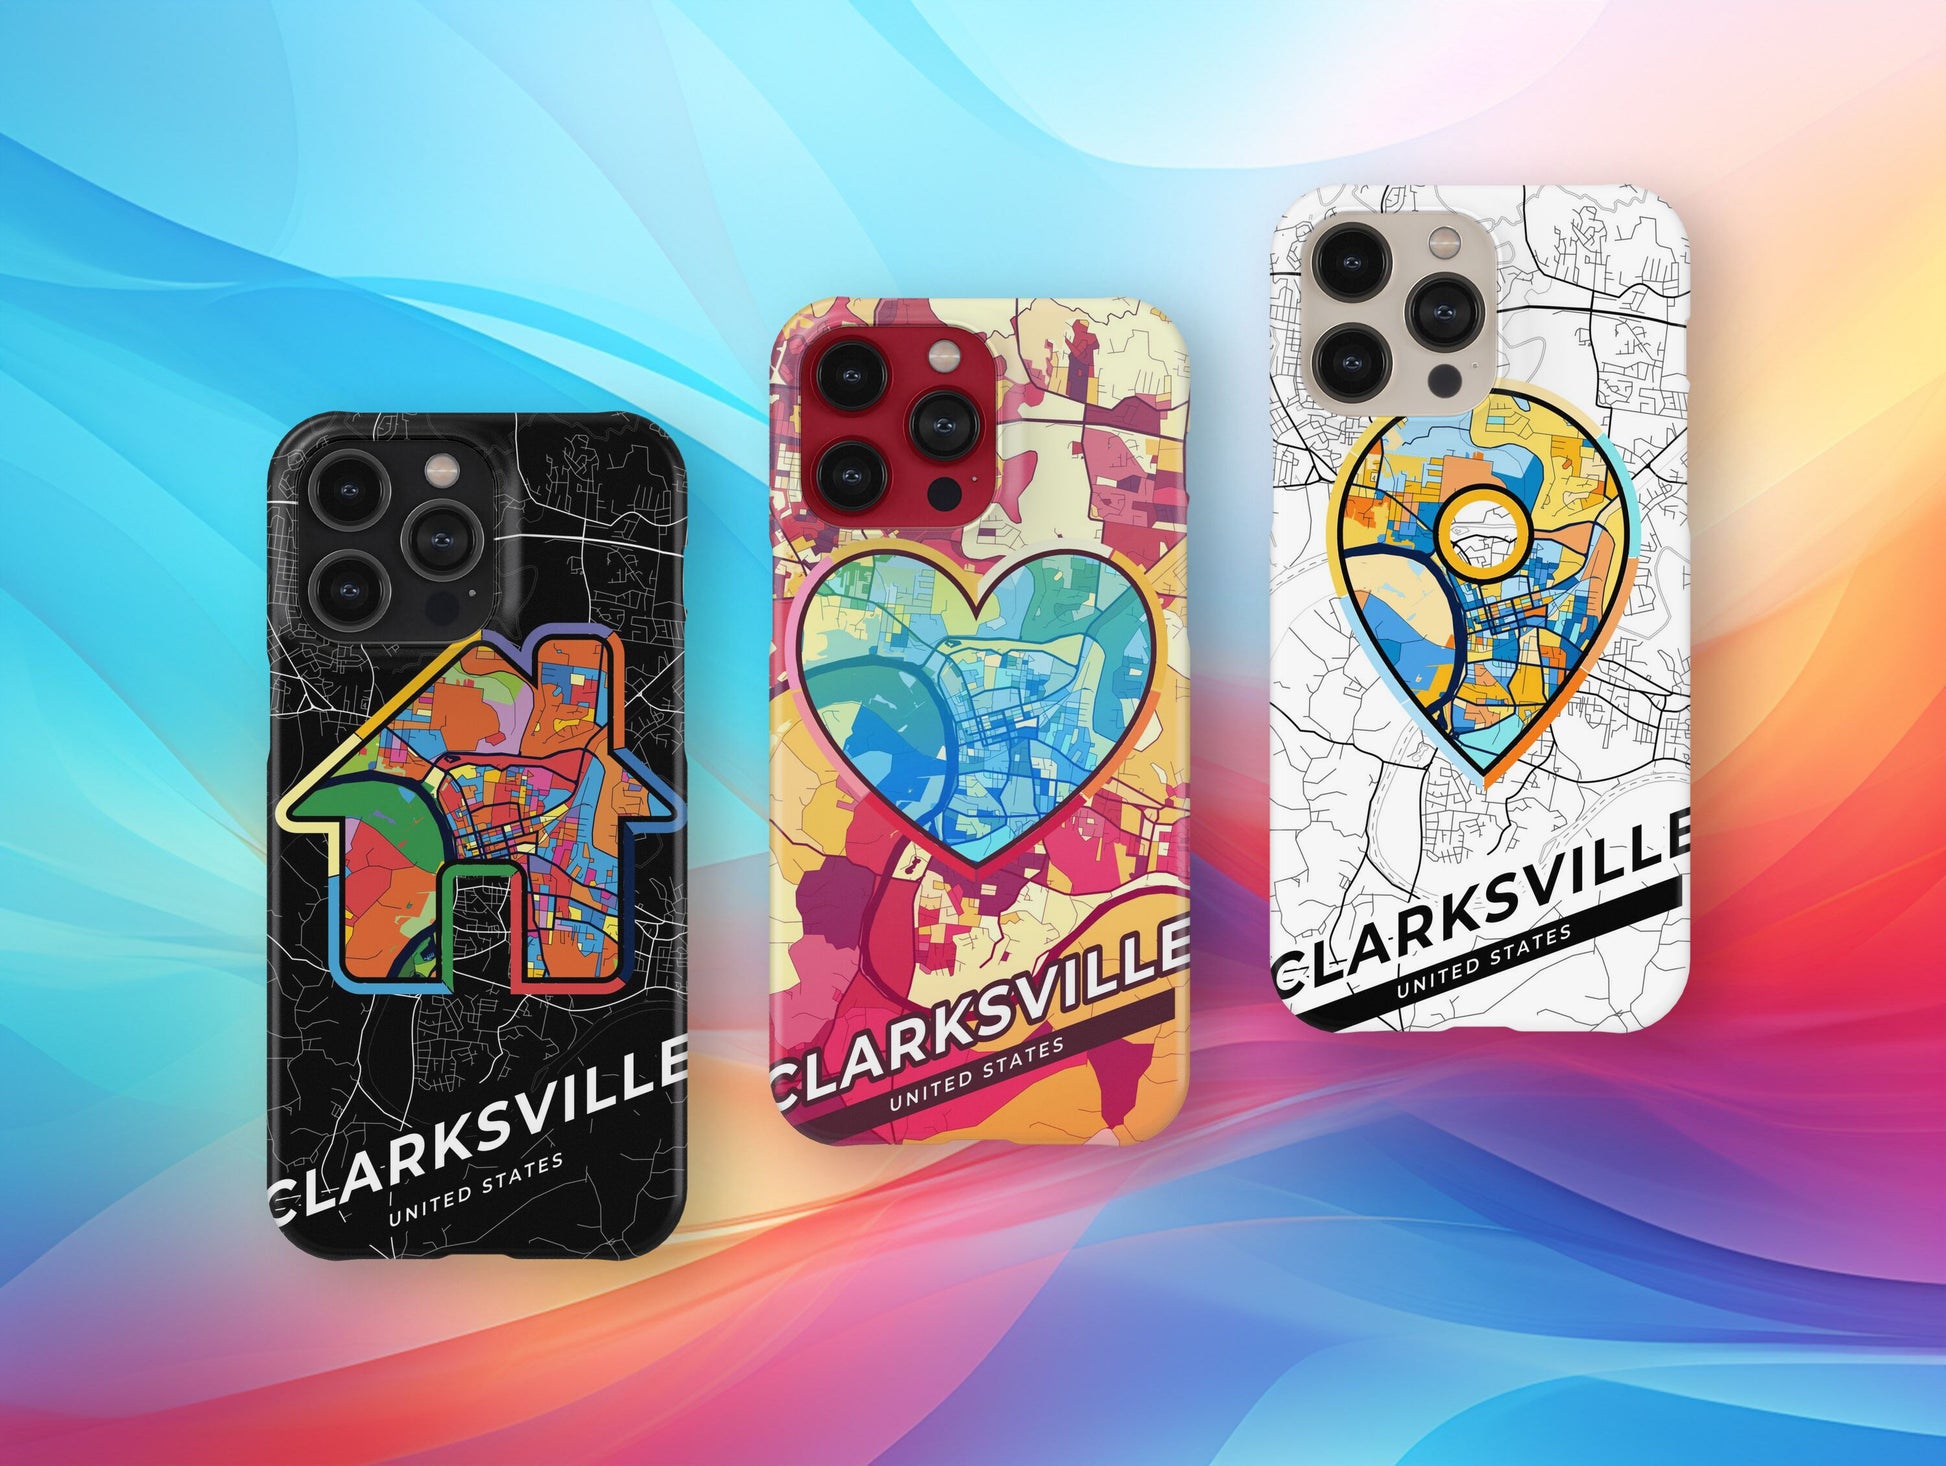 Clarksville Tennessee slim phone case with colorful icon. Birthday, wedding or housewarming gift. Couple match cases.